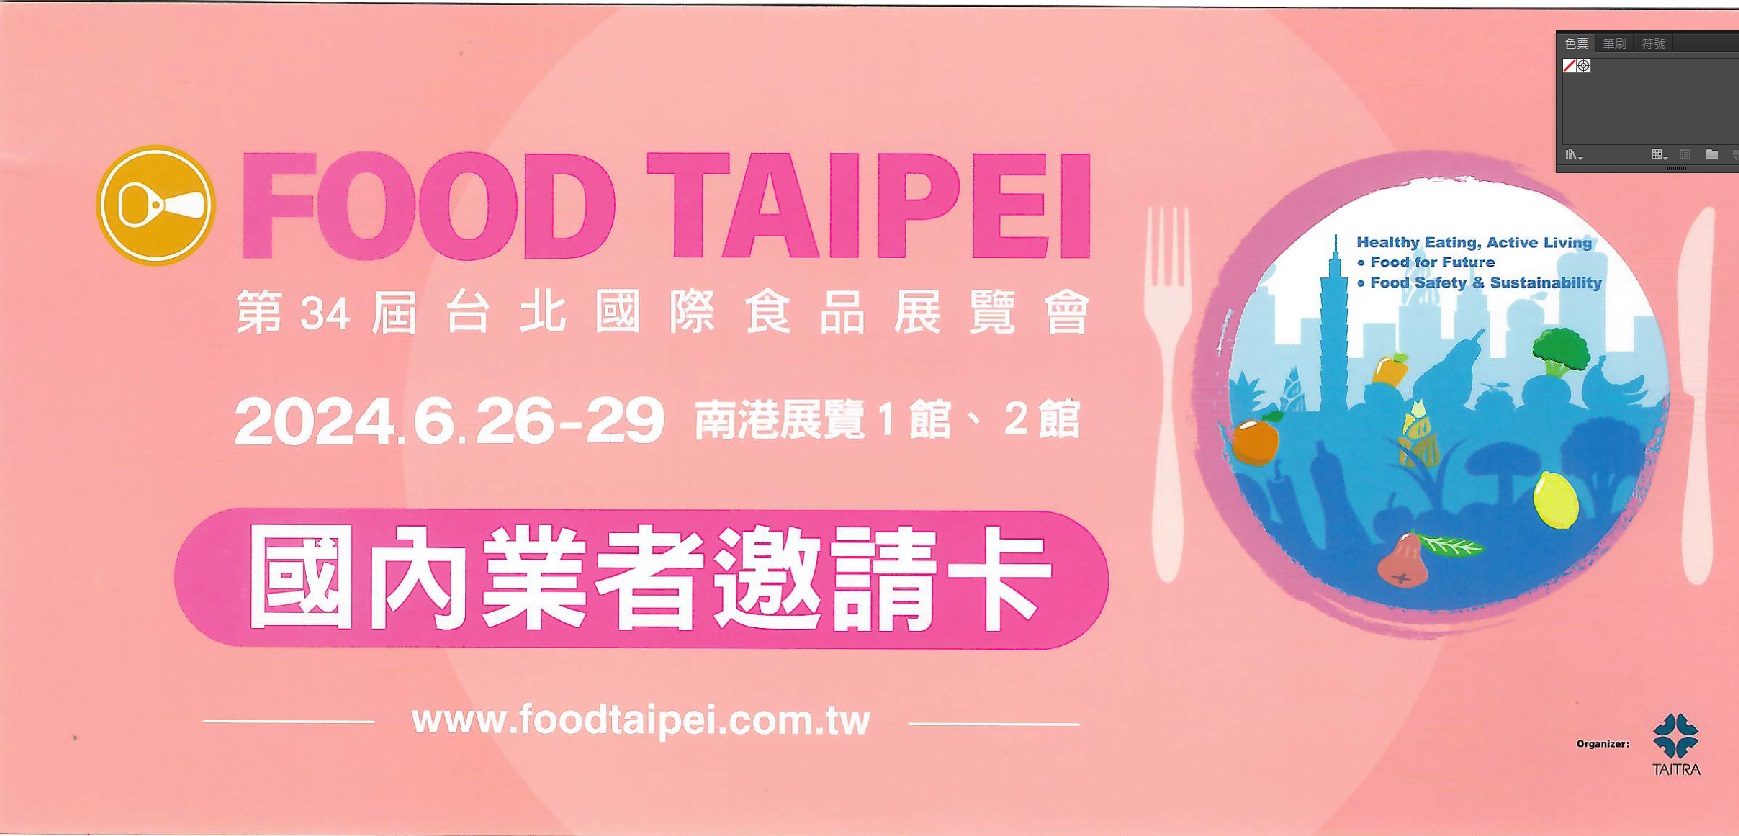 The 34nd Taipei International Food Show in 2024